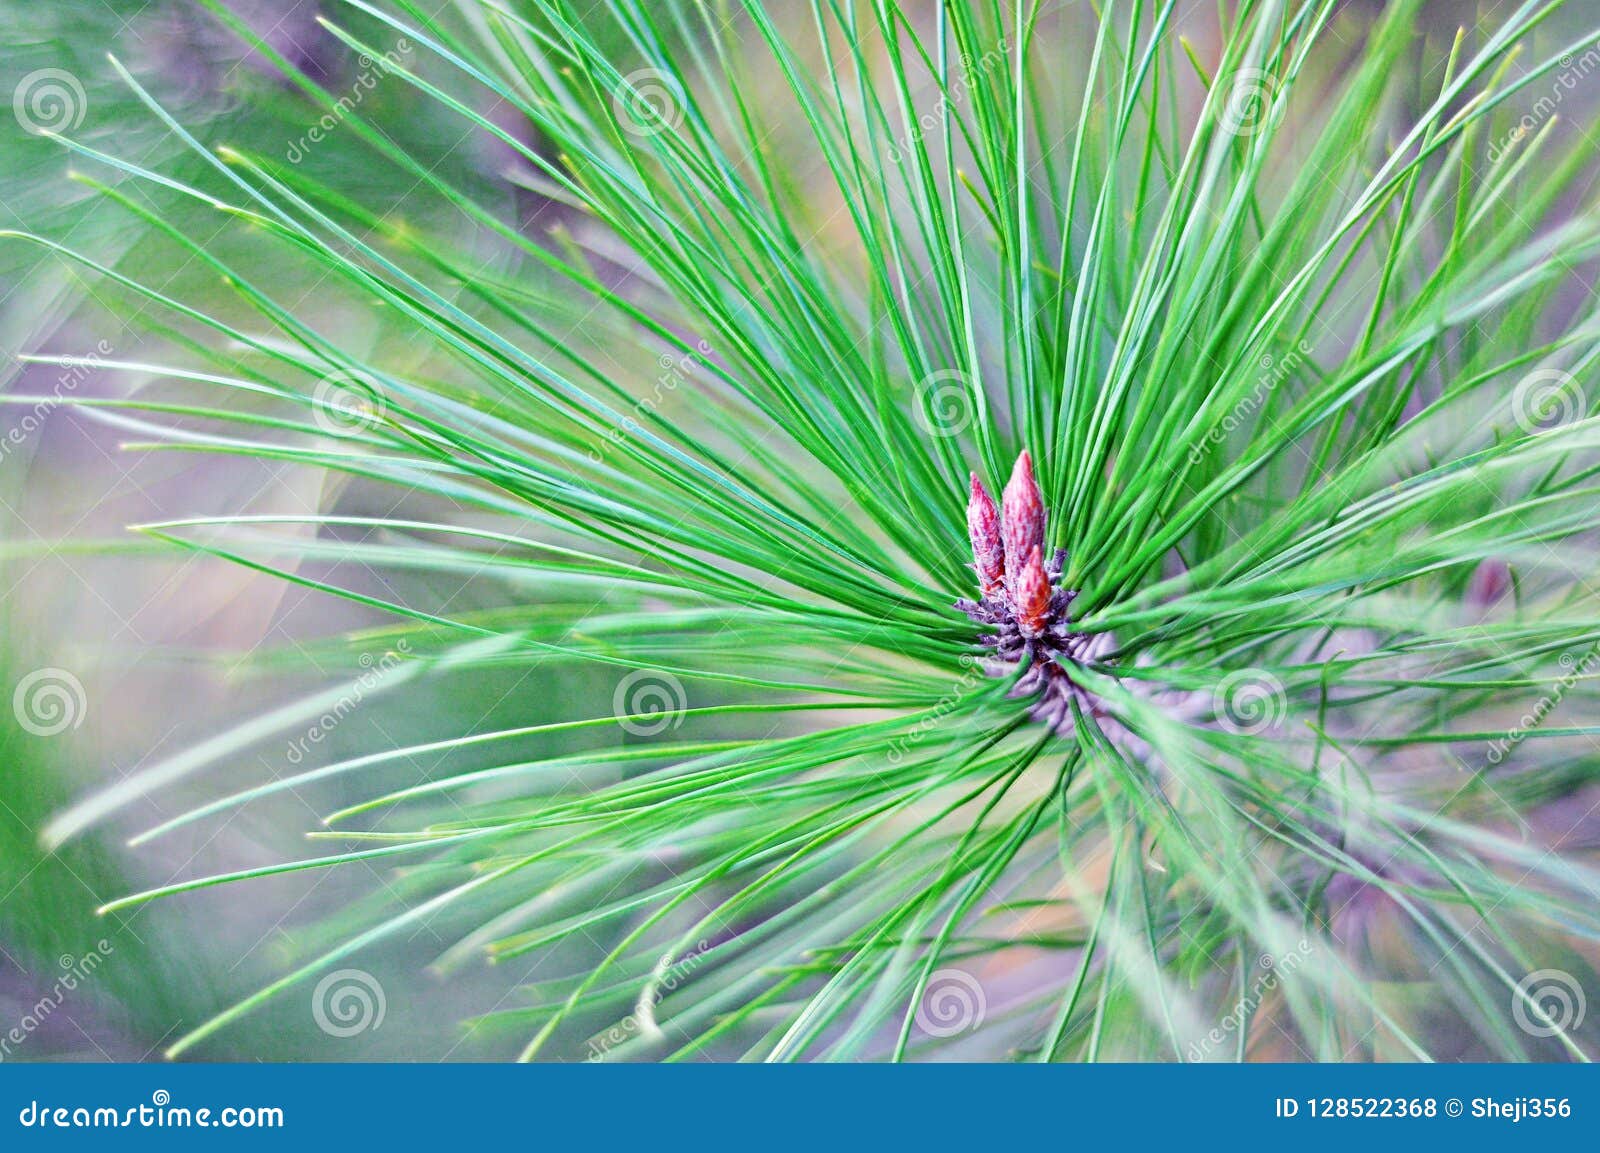 Very Artistically Artistic Branches Stock Photo - Image of artistic